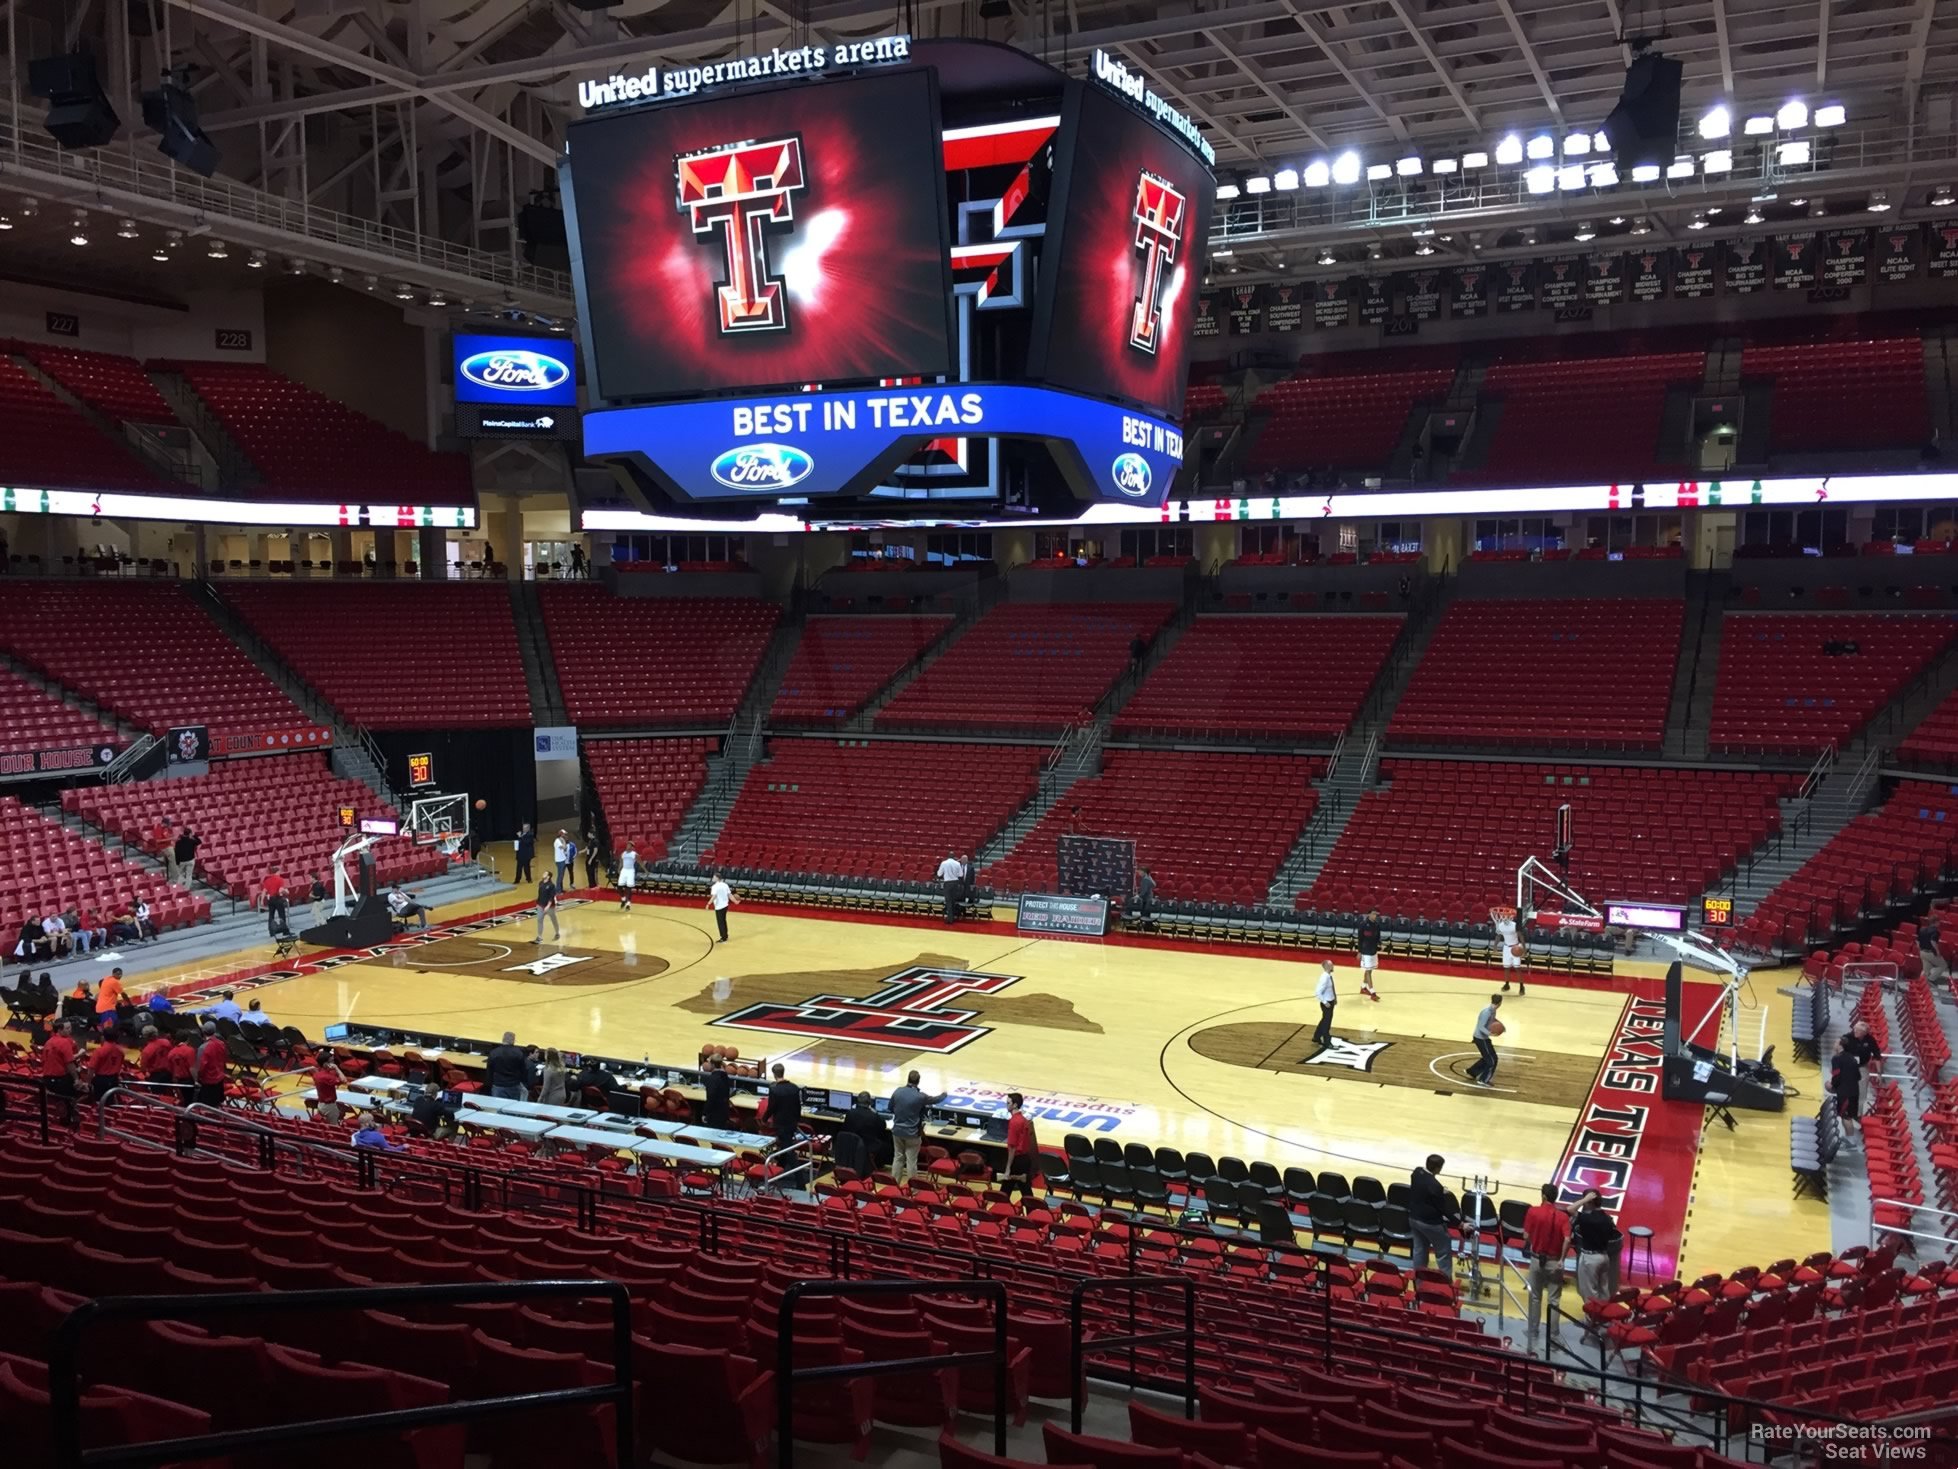 section 111, row 25 seat view  - united supermarkets arena